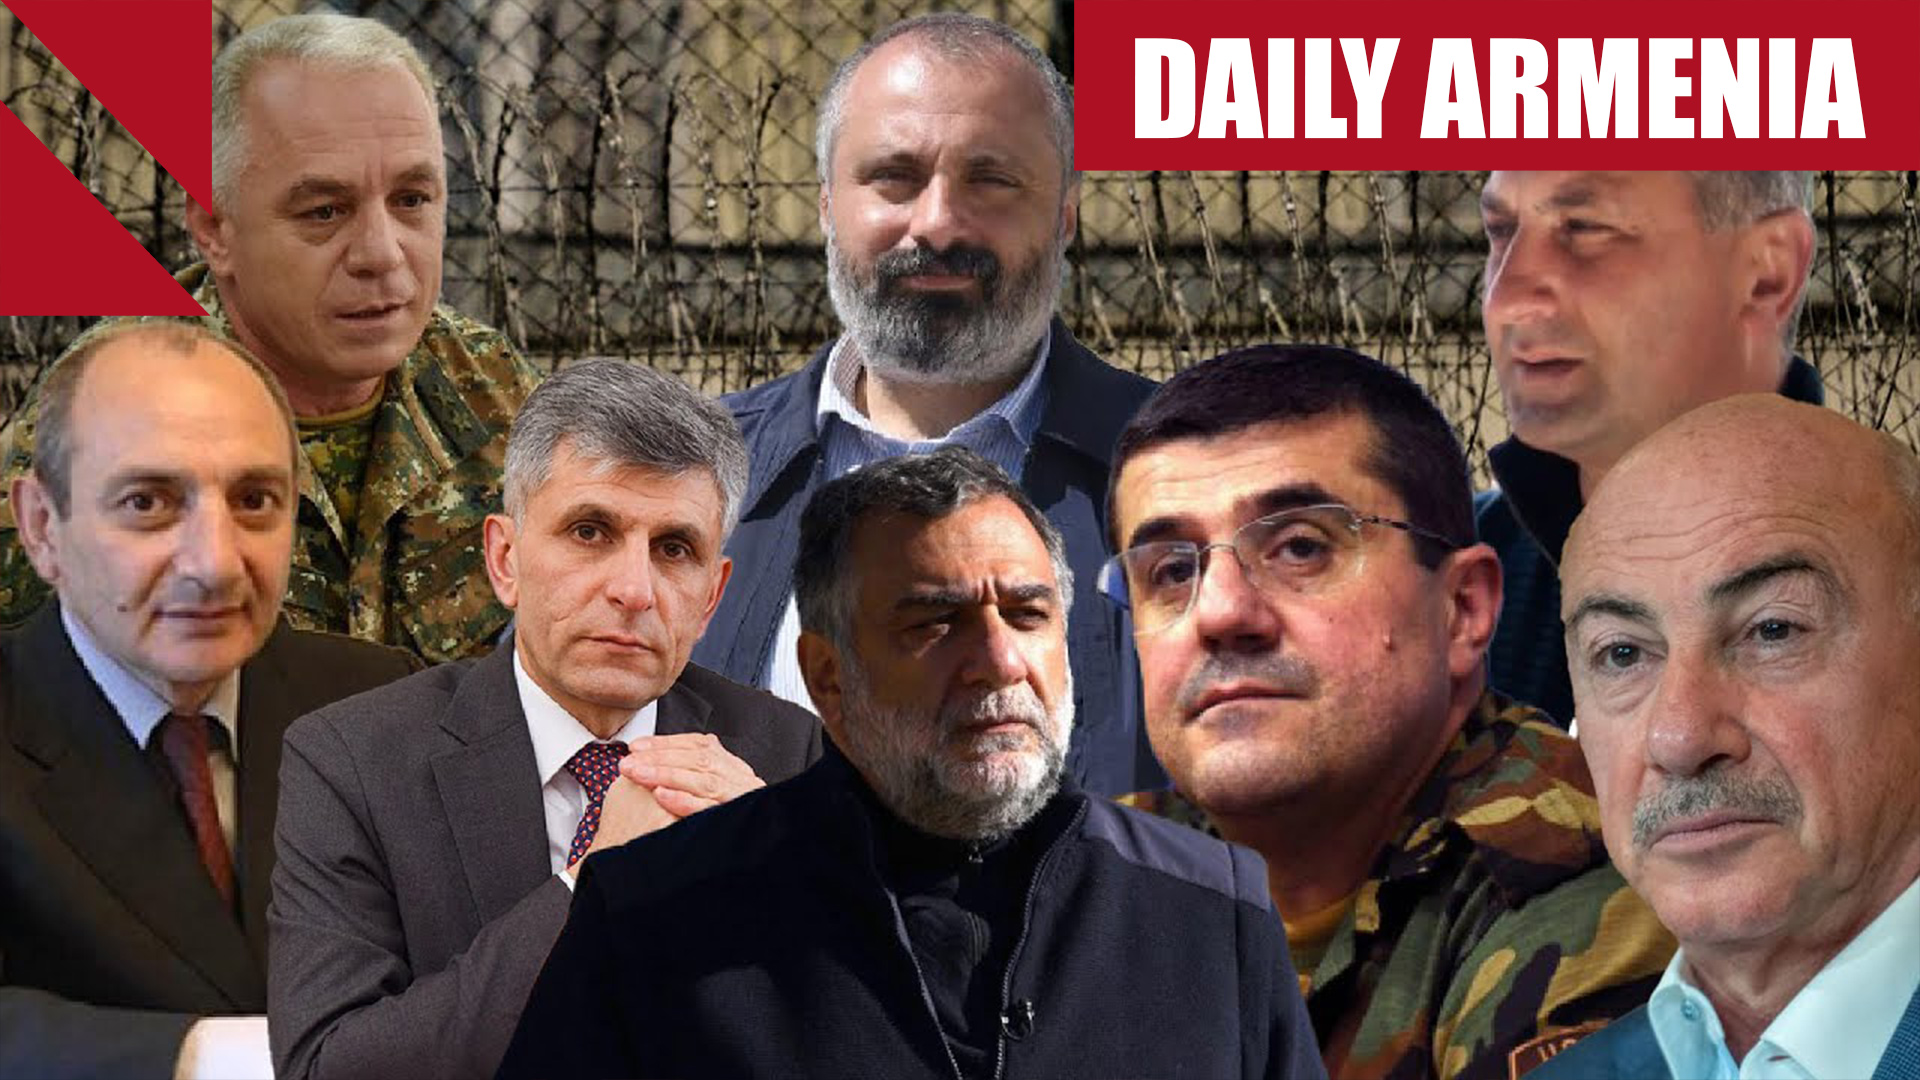 Nobel Laureates & Humanitarians Call for Unconditional Release of Detained Armenians in Azerbaijan